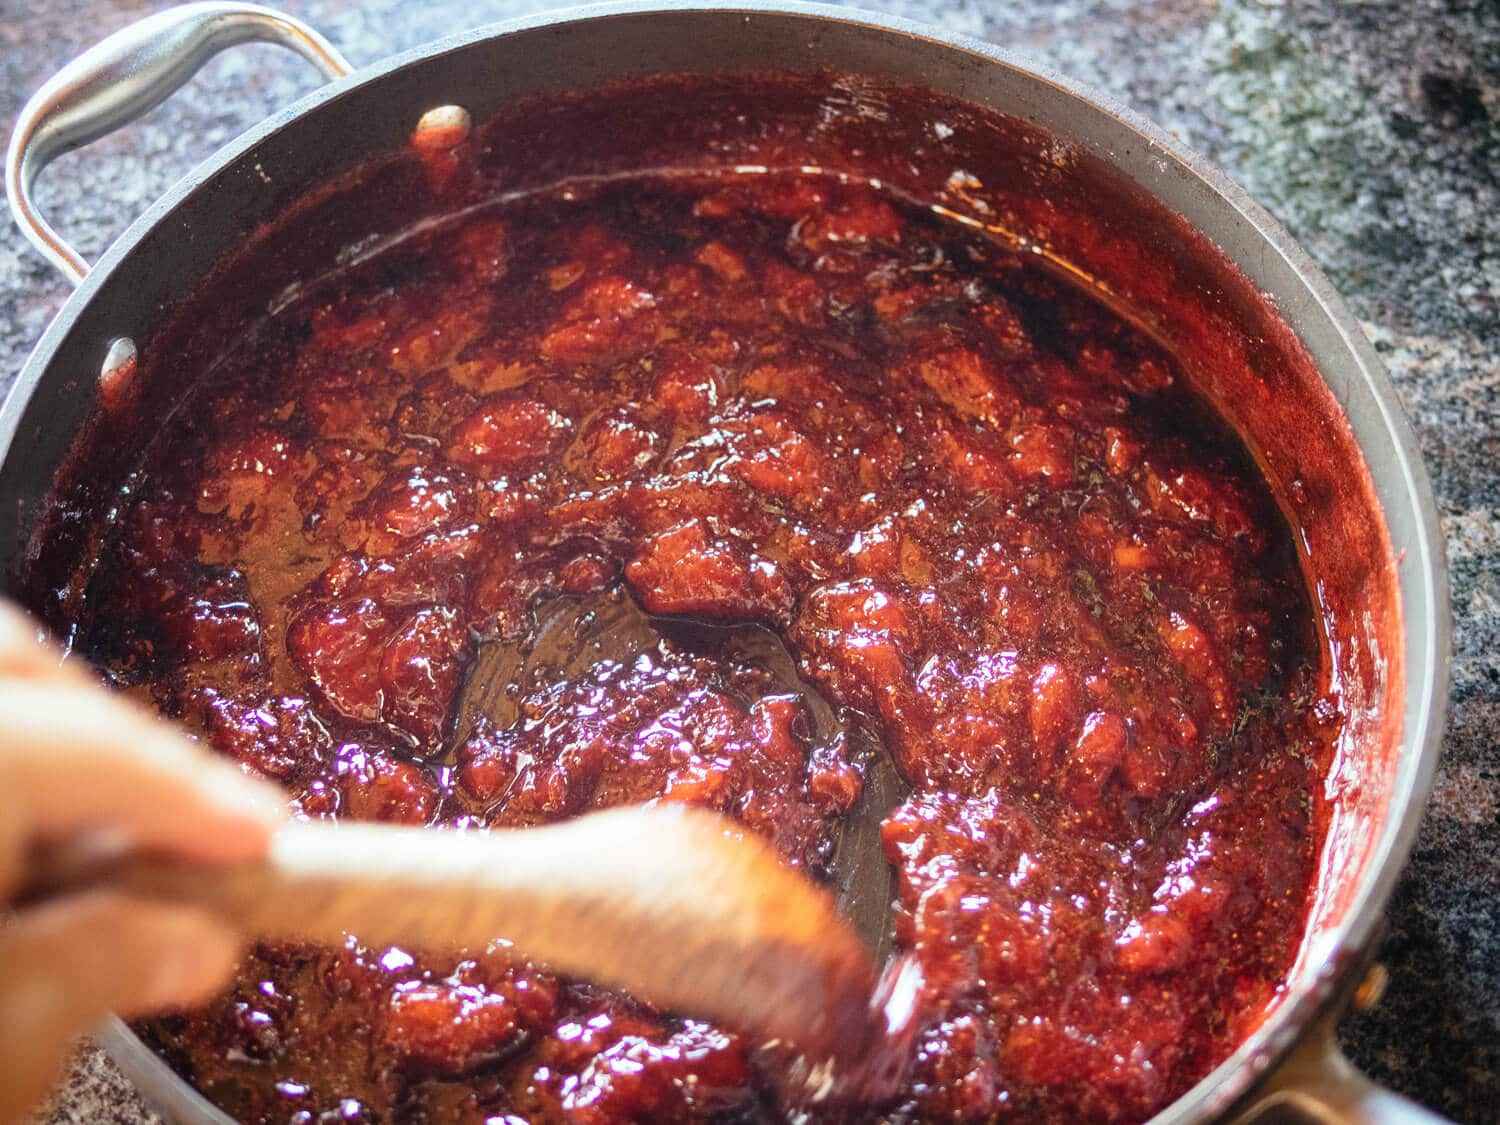 Boil until the consistency thickens and reduces into a jam